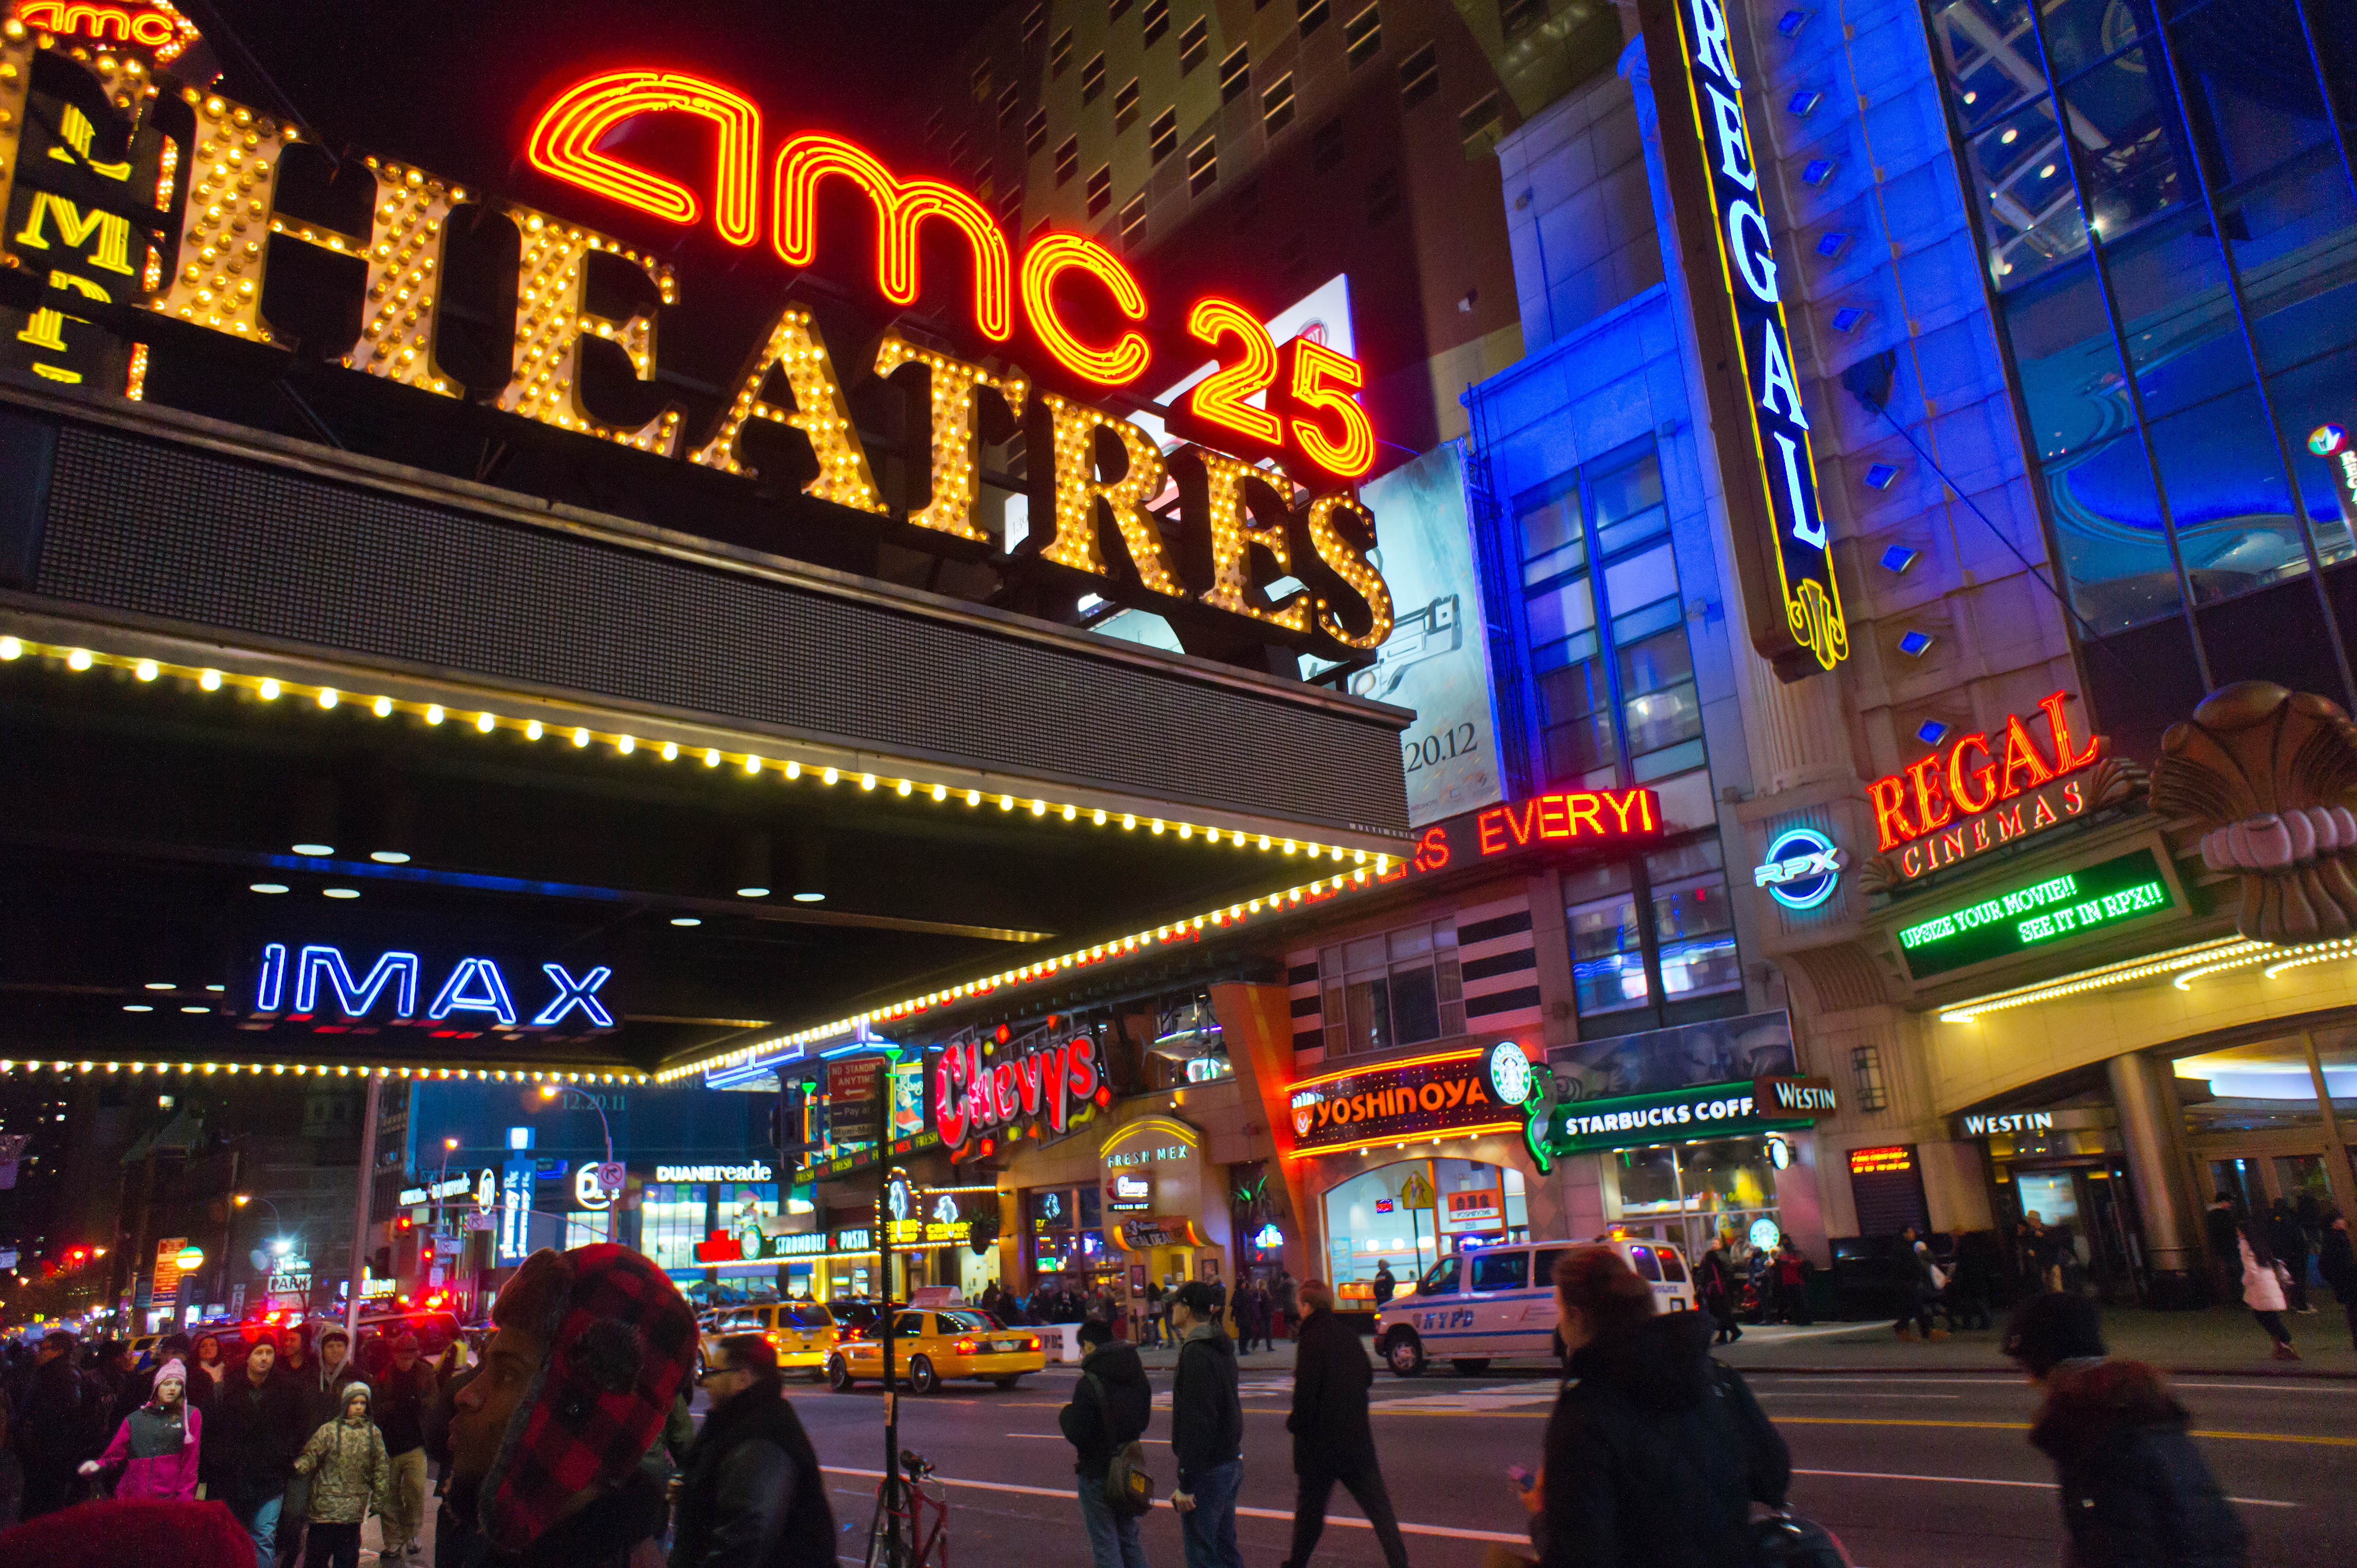 AMC Entertainment Q2 Earnings: What You Need To Know About The 'APE' Preferred Dividend